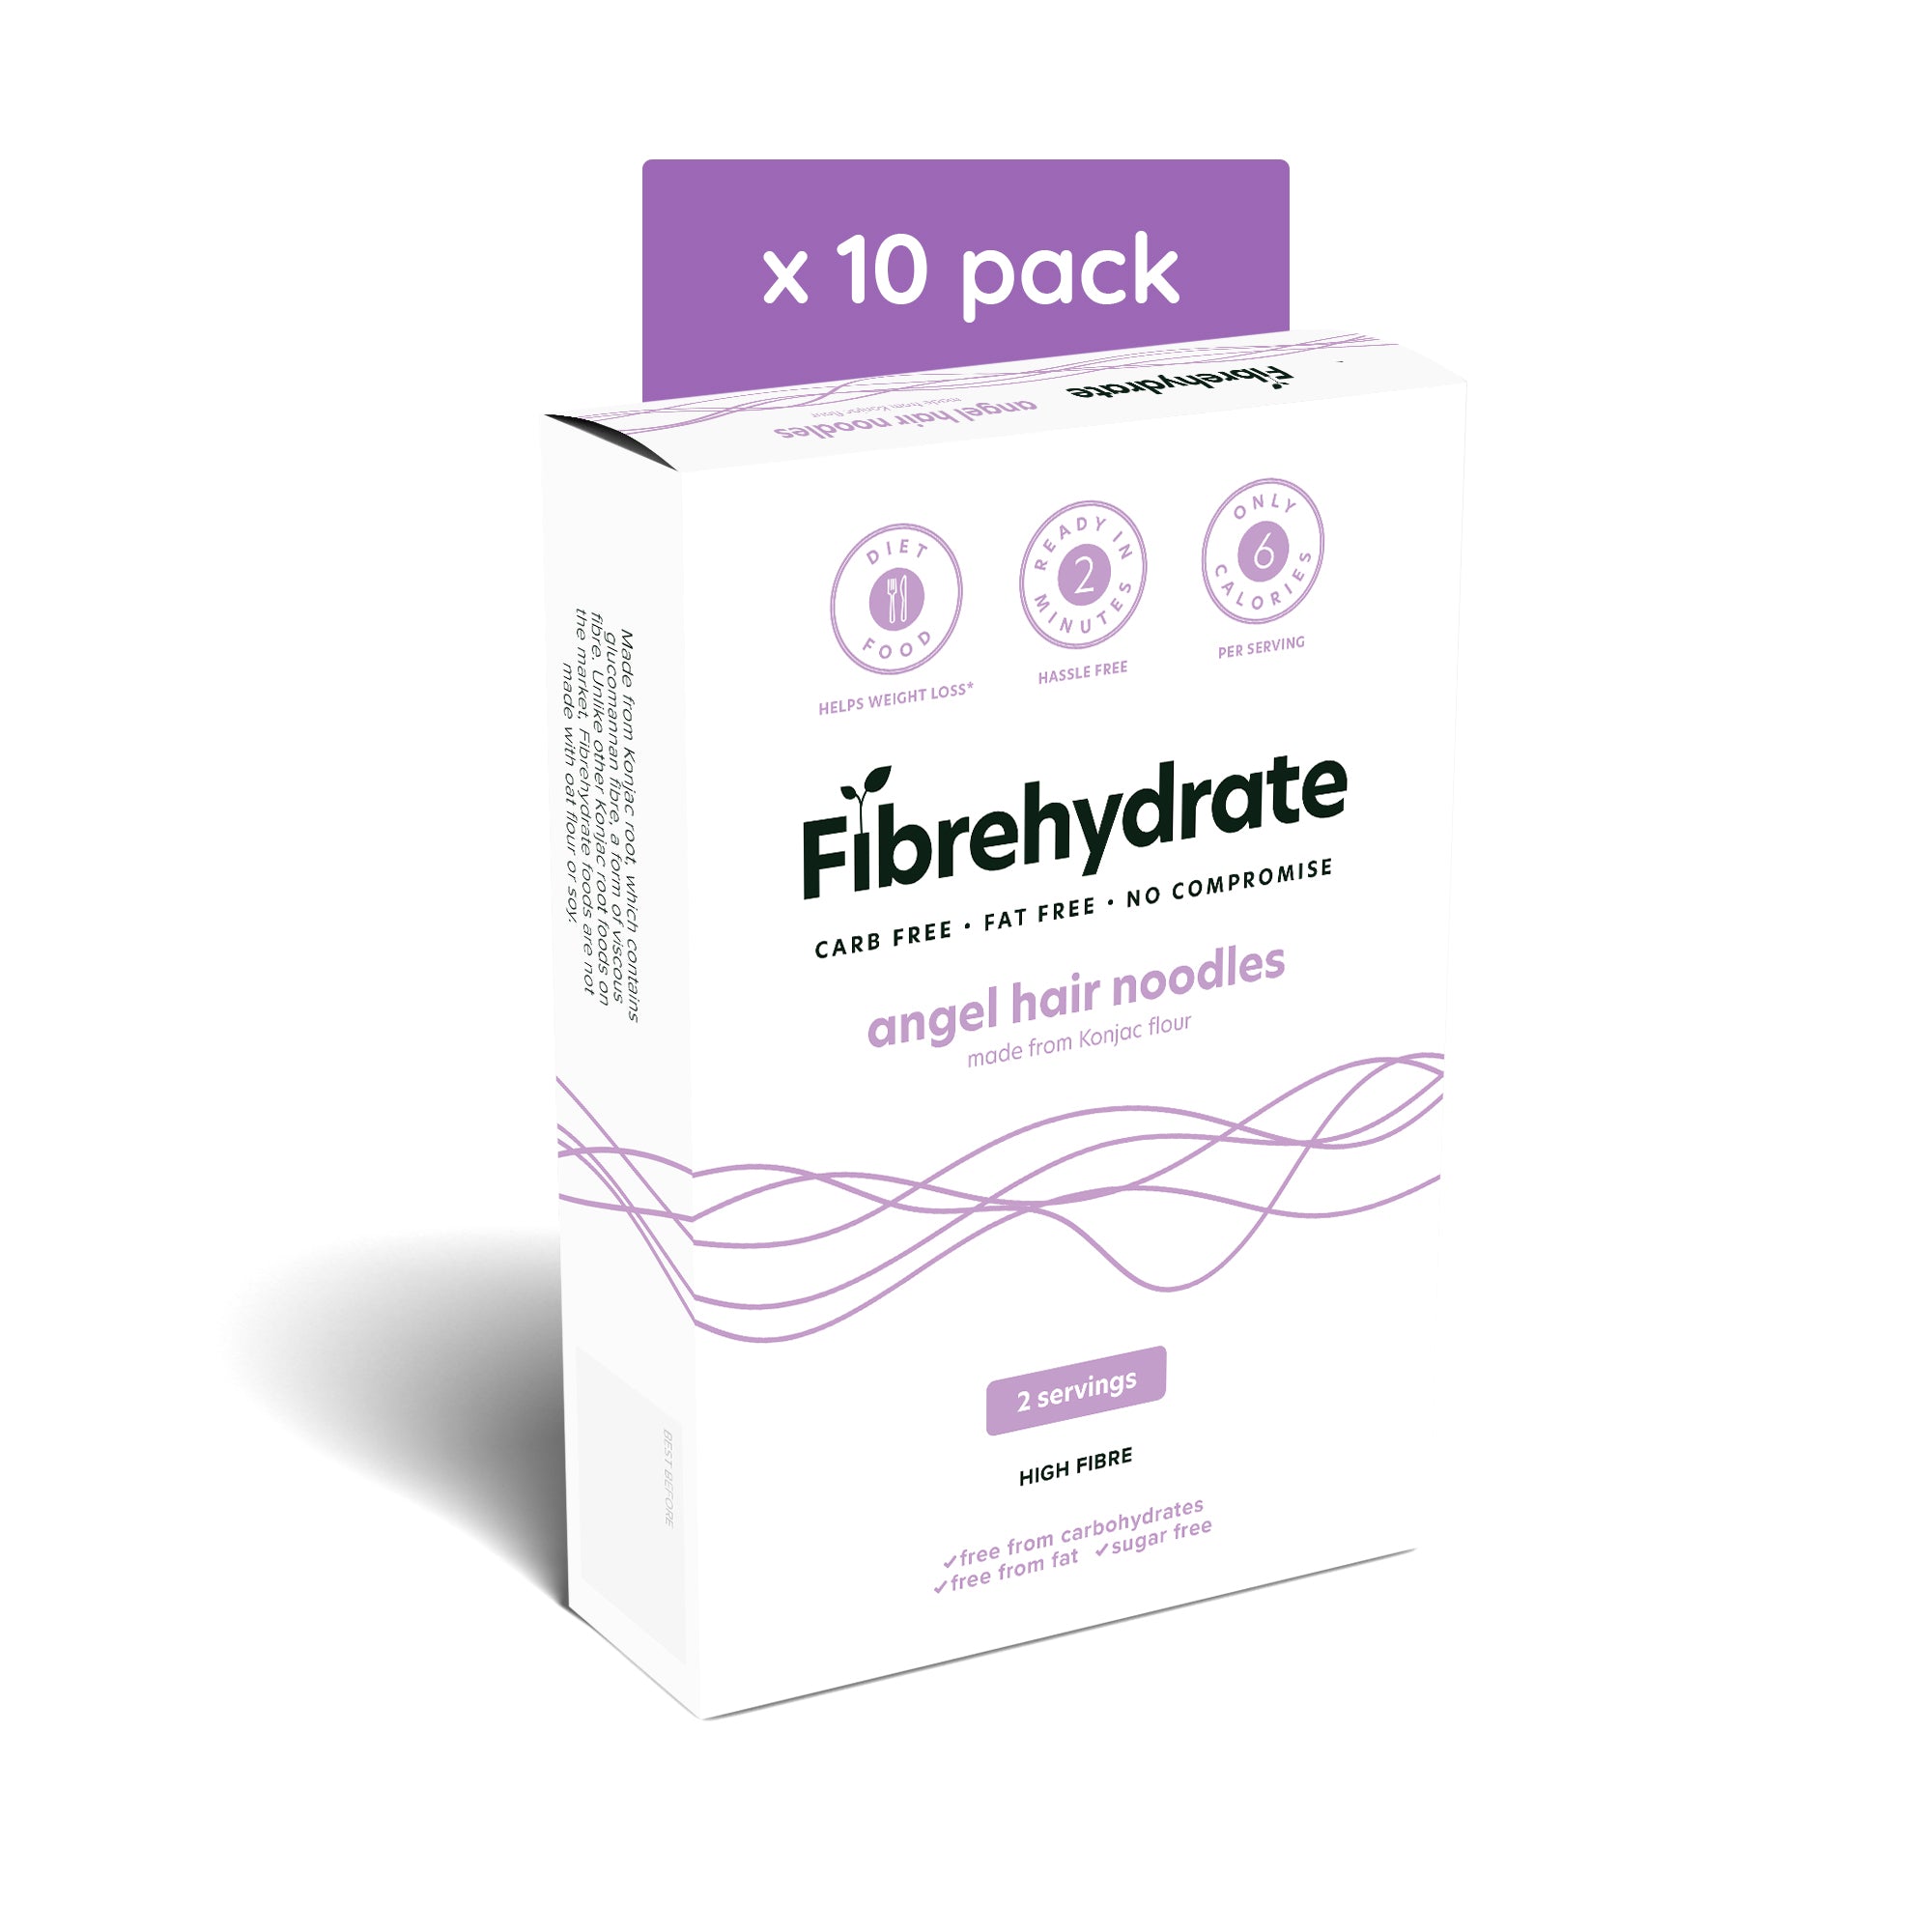 Fibrehydrate Angel Hair Noodles (10 pack)